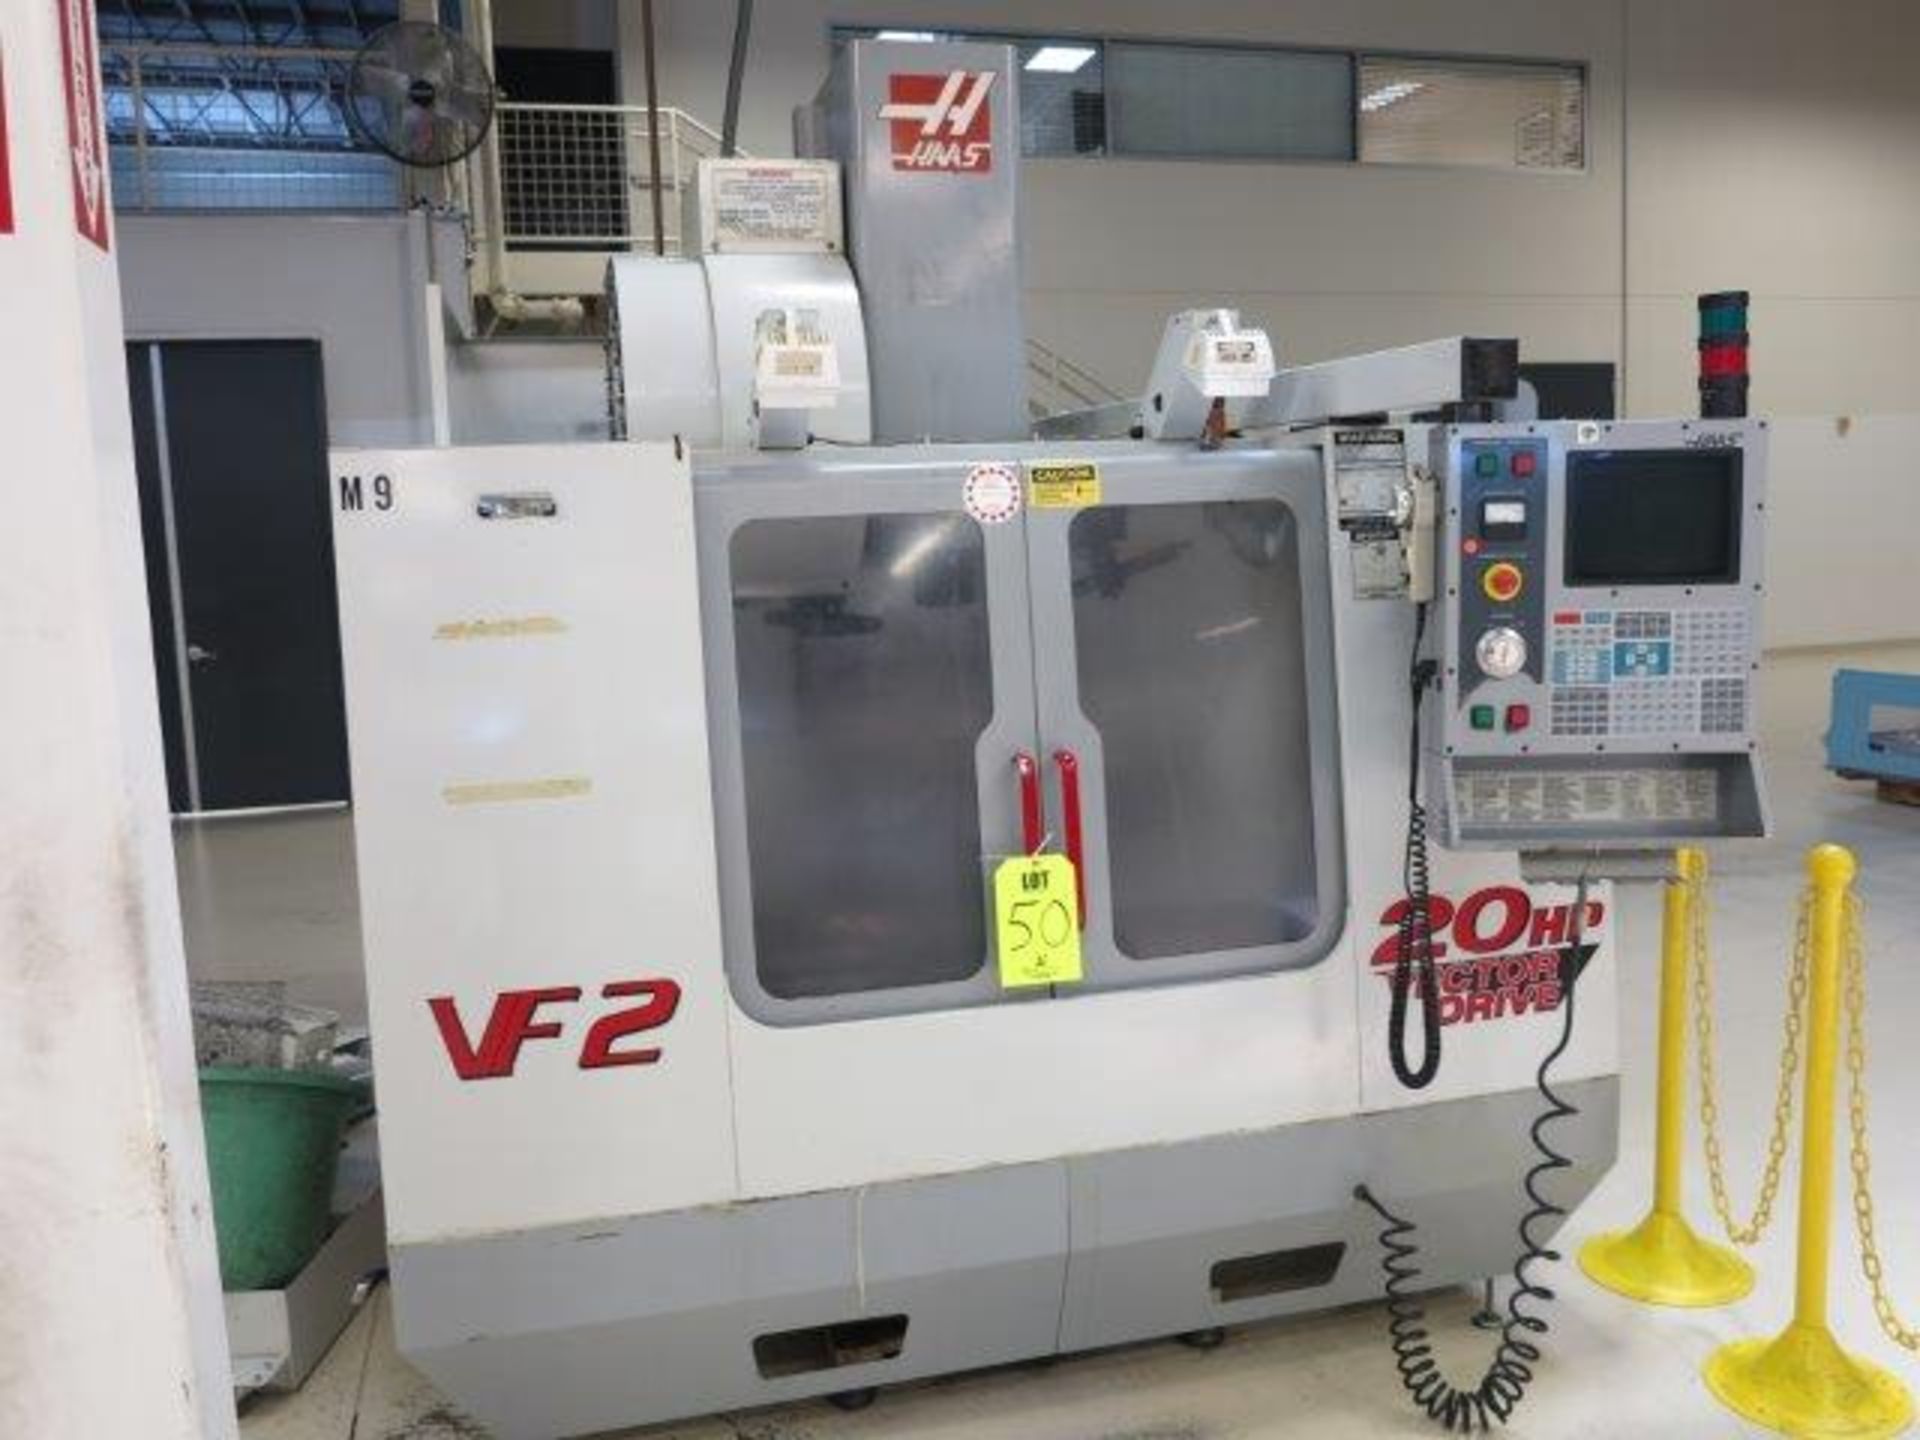 2001 HAAS VF-2, TRAVELS: 30" X 16" X 20", 7500 RPM SPINDLE, CAT 40 TAPER, 20 STATION ATC, 15 HP,